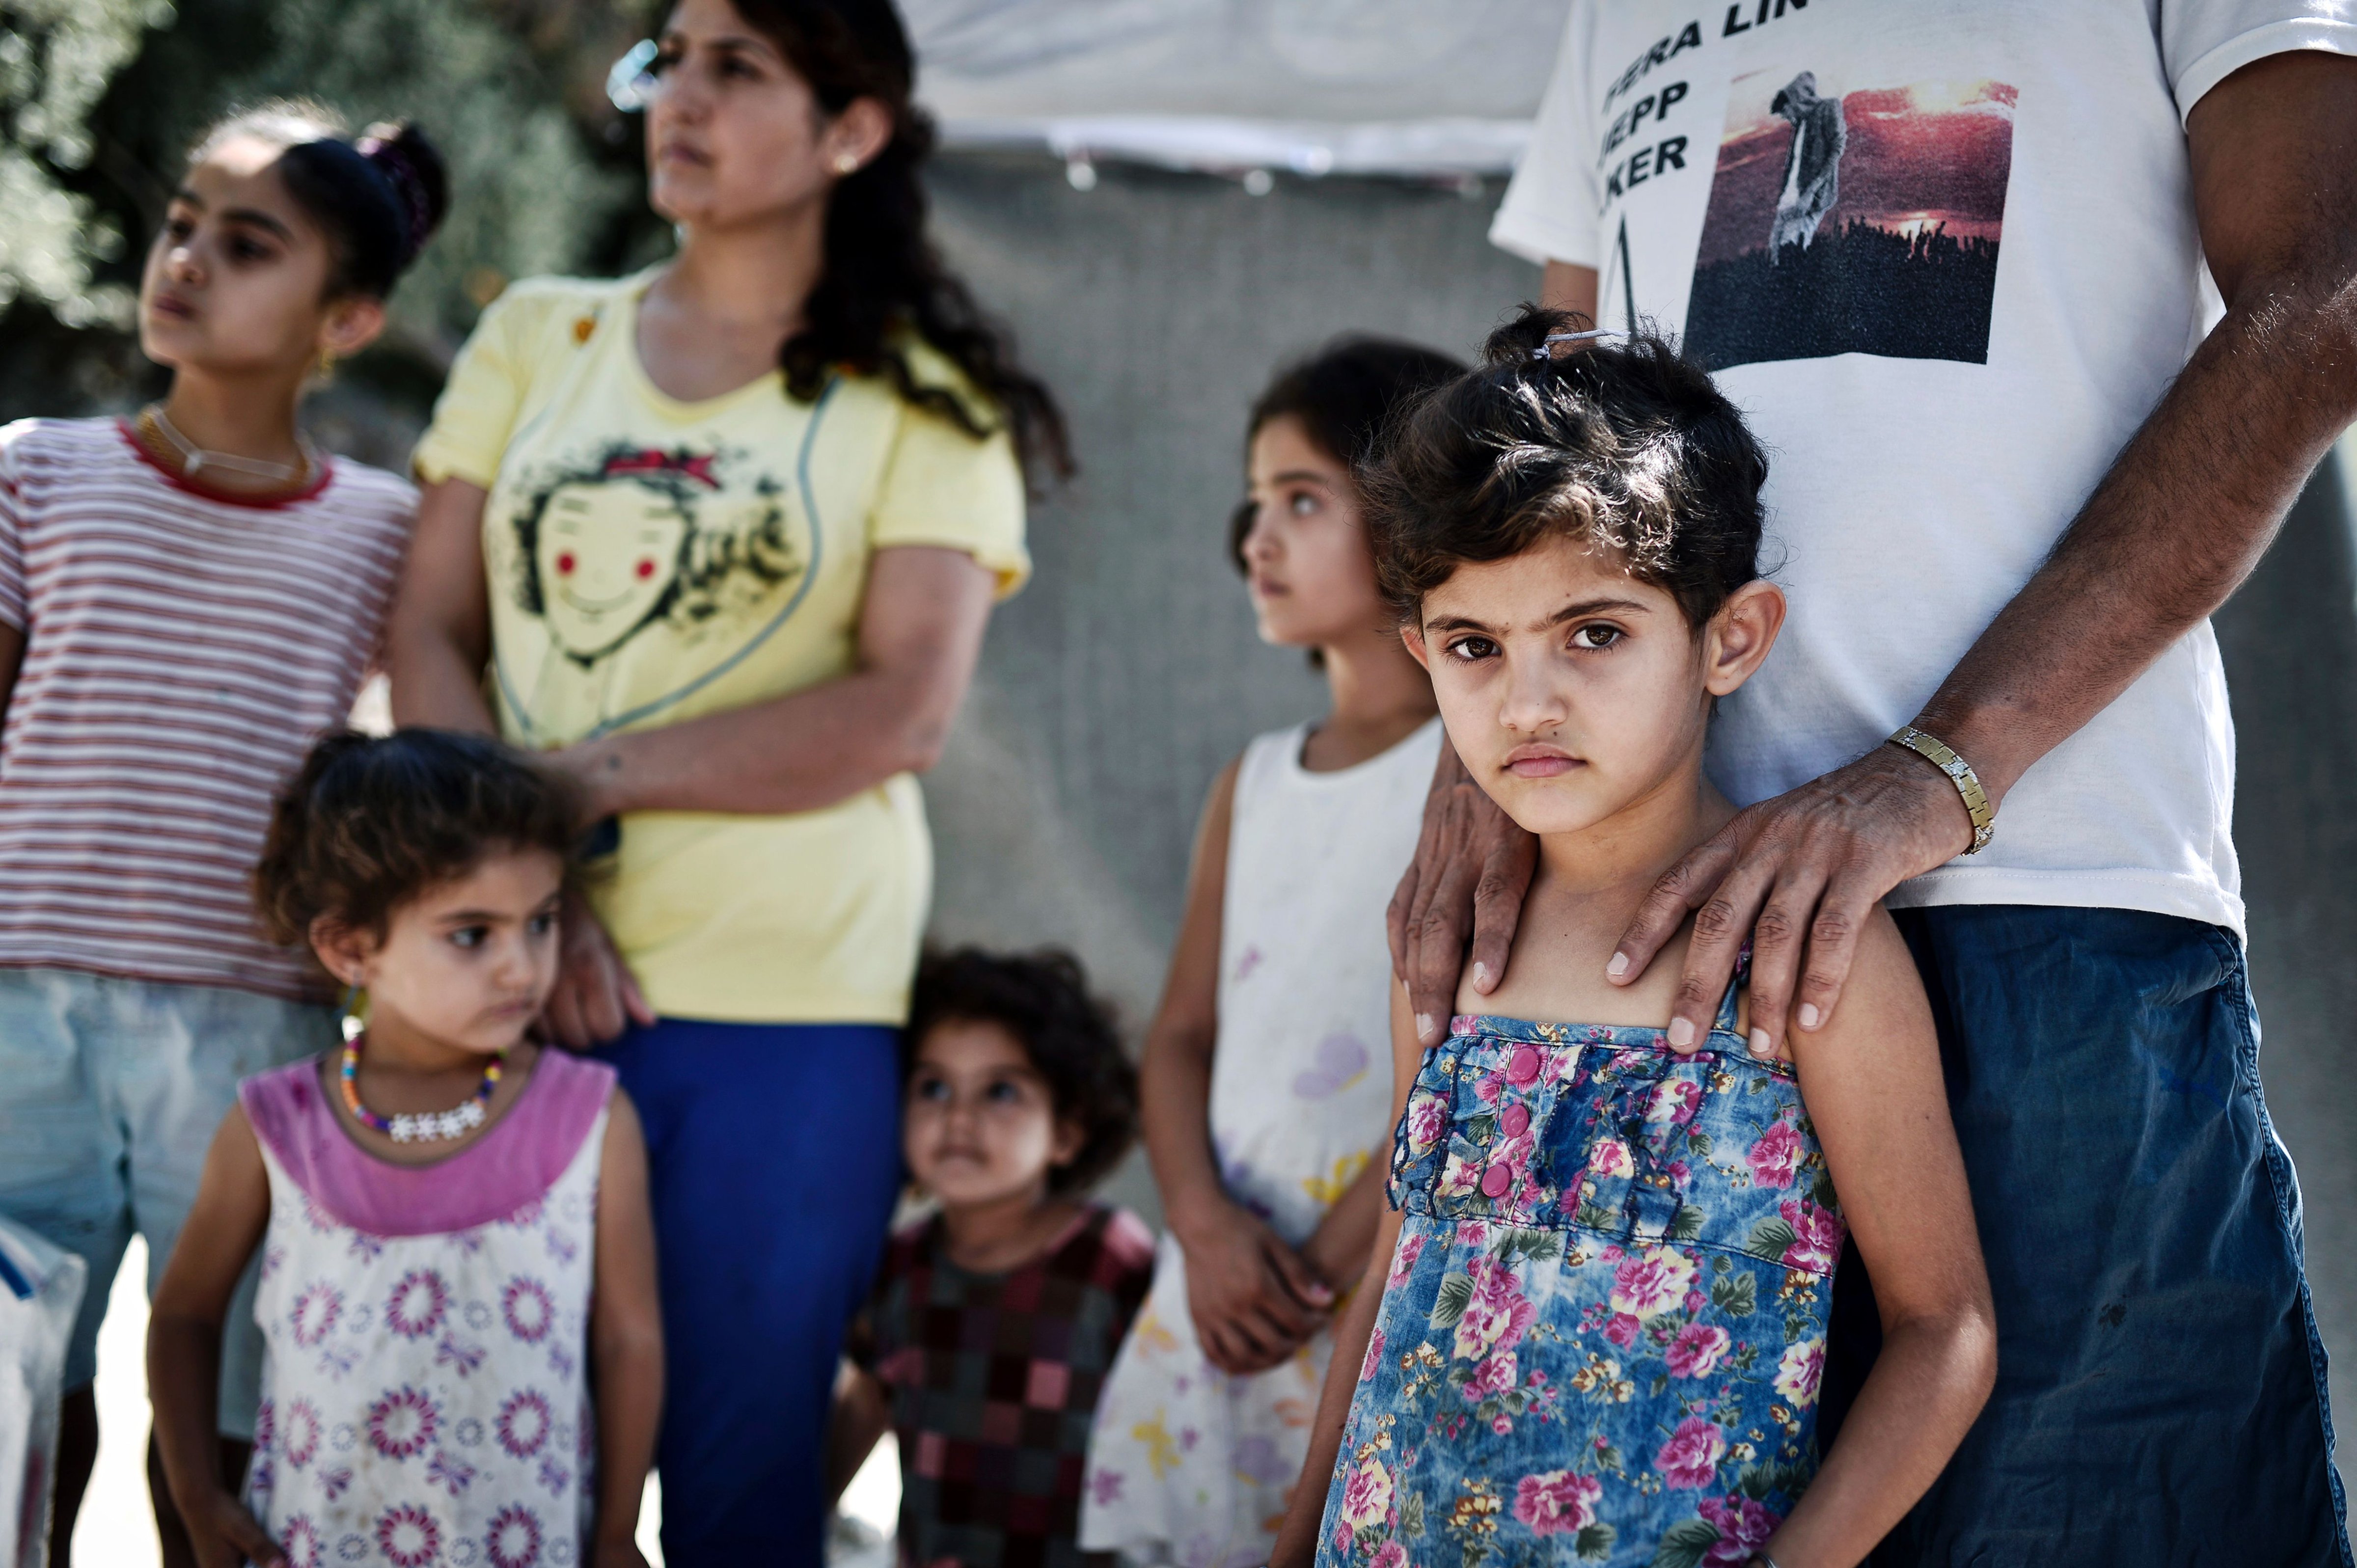 Ando Elias Tareq, a Yezidi from Sinjar in Iraq, stands behind his daughter outside the Samos hotspot where they live on Sept. 1, 2016. (Louisa Gouliamaki—AFP/Getty Images)